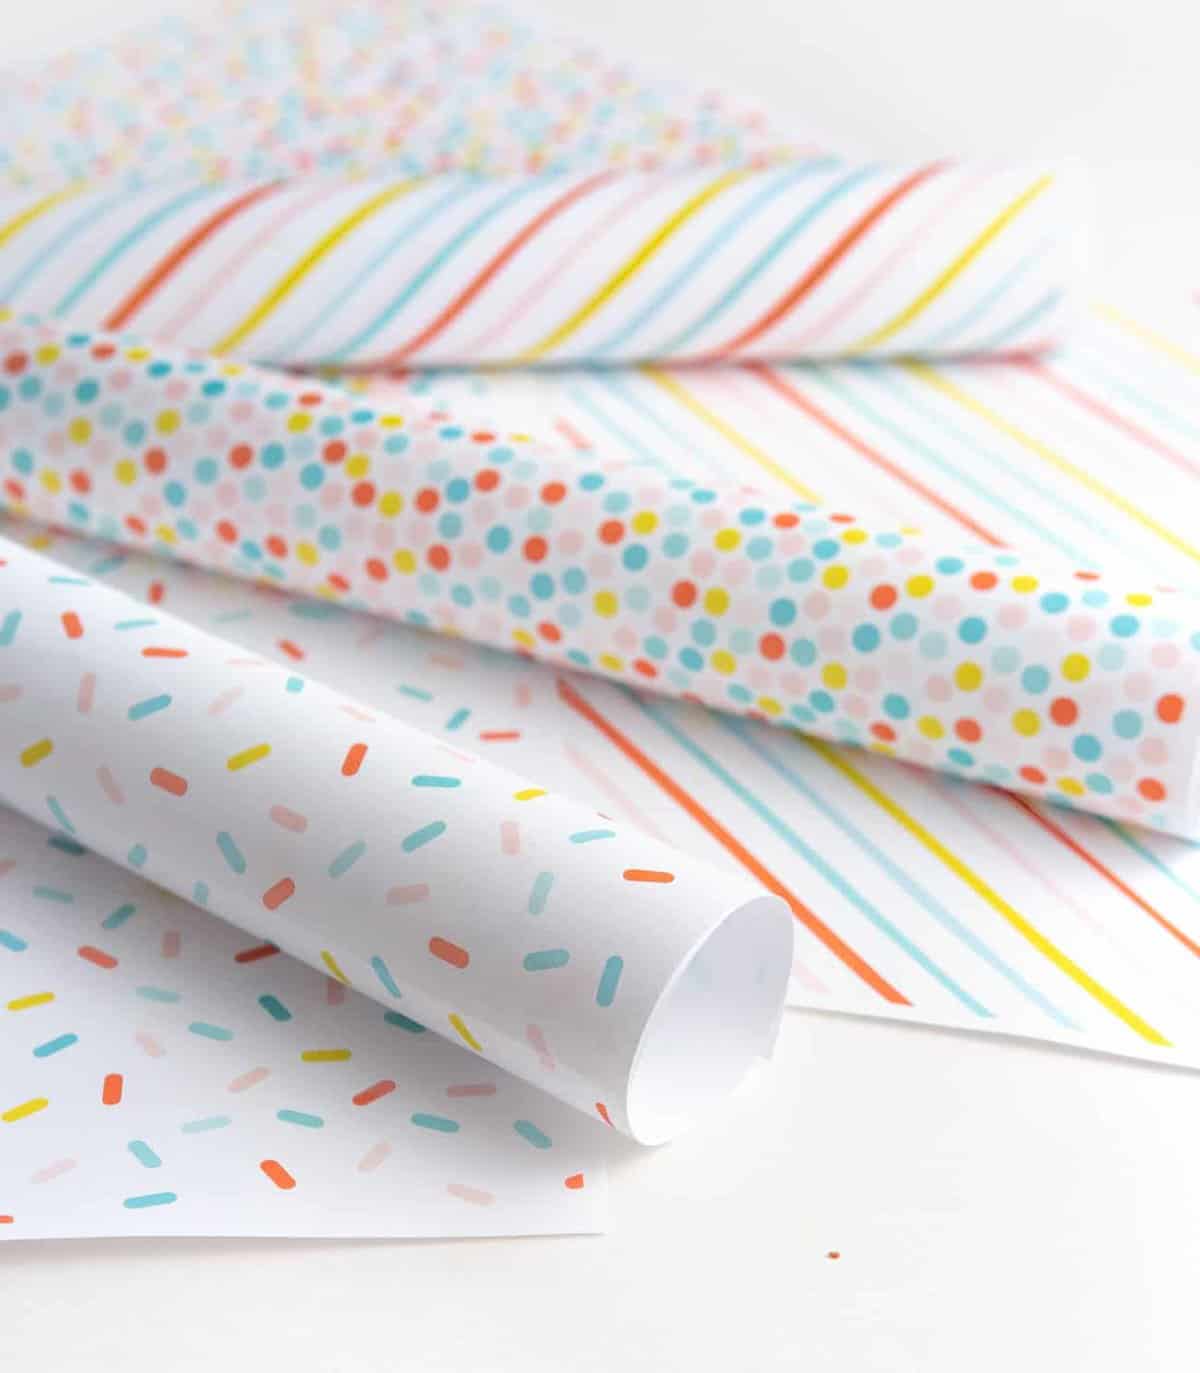 Lovely gift wrap 2 sheets and a free gift tag for a Baby Girl Gift Wrapping Paper